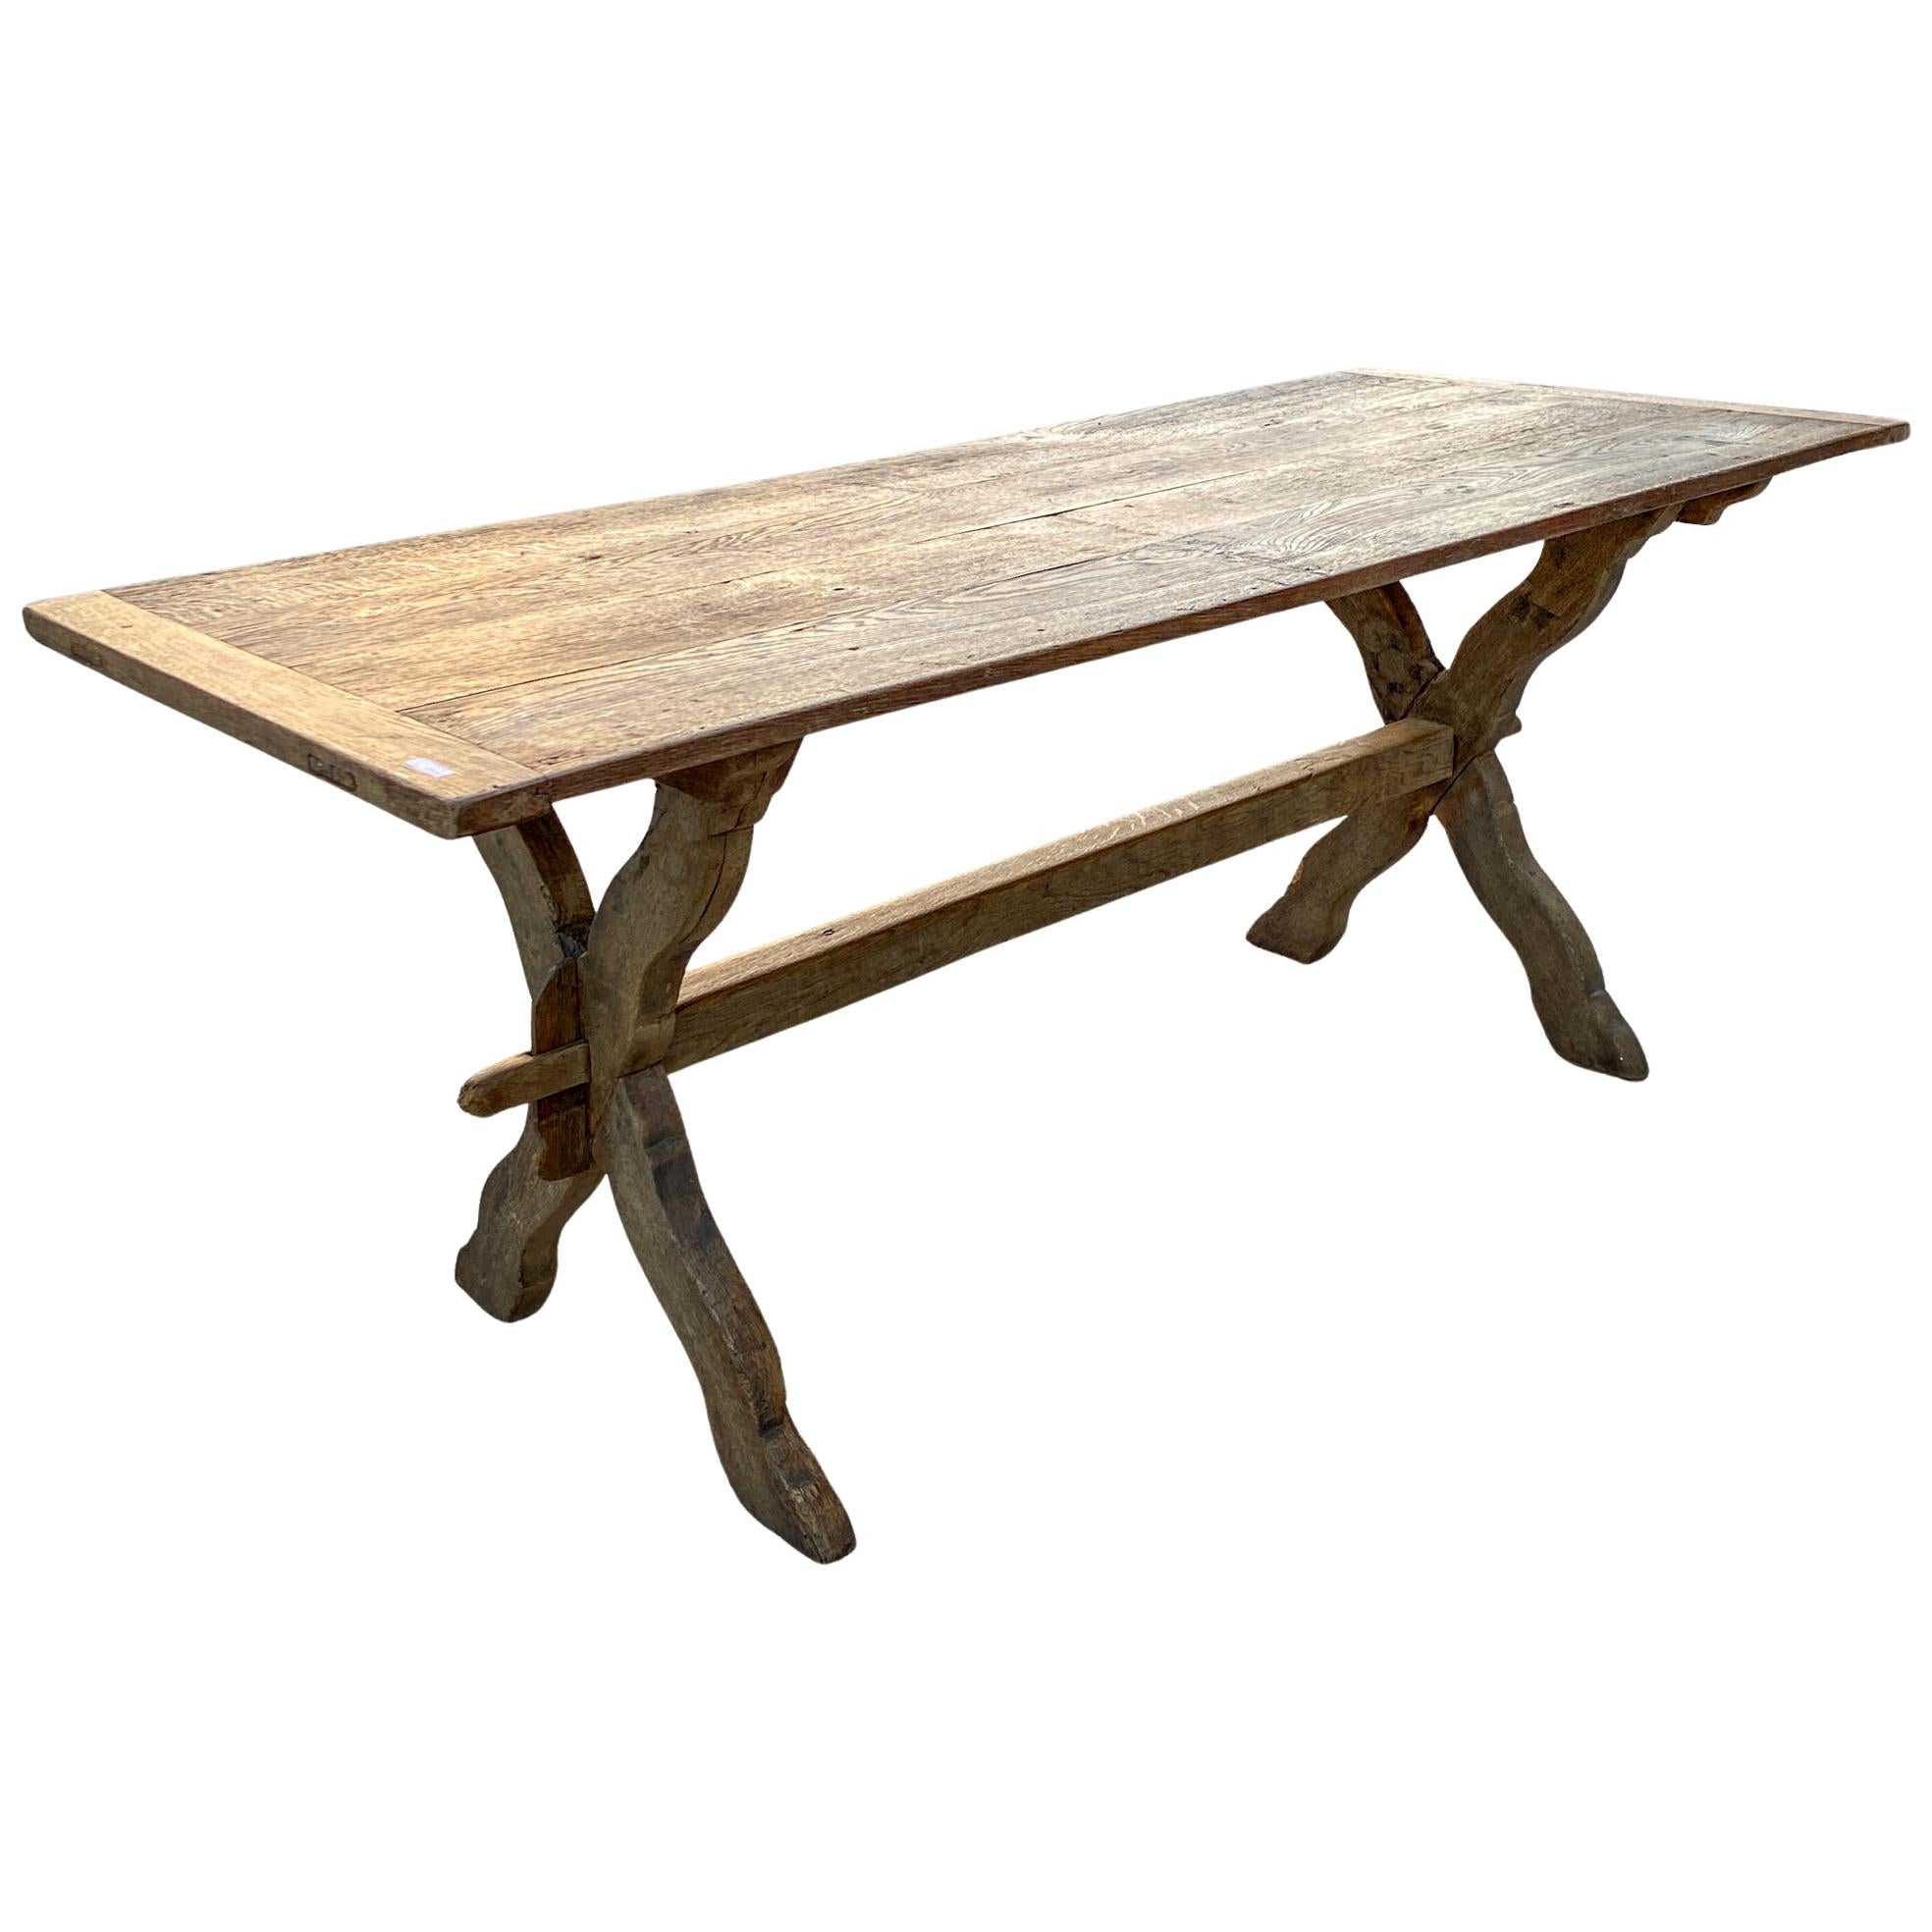 1920s French Oak Trestle Style Farm Table with X-Base Legs